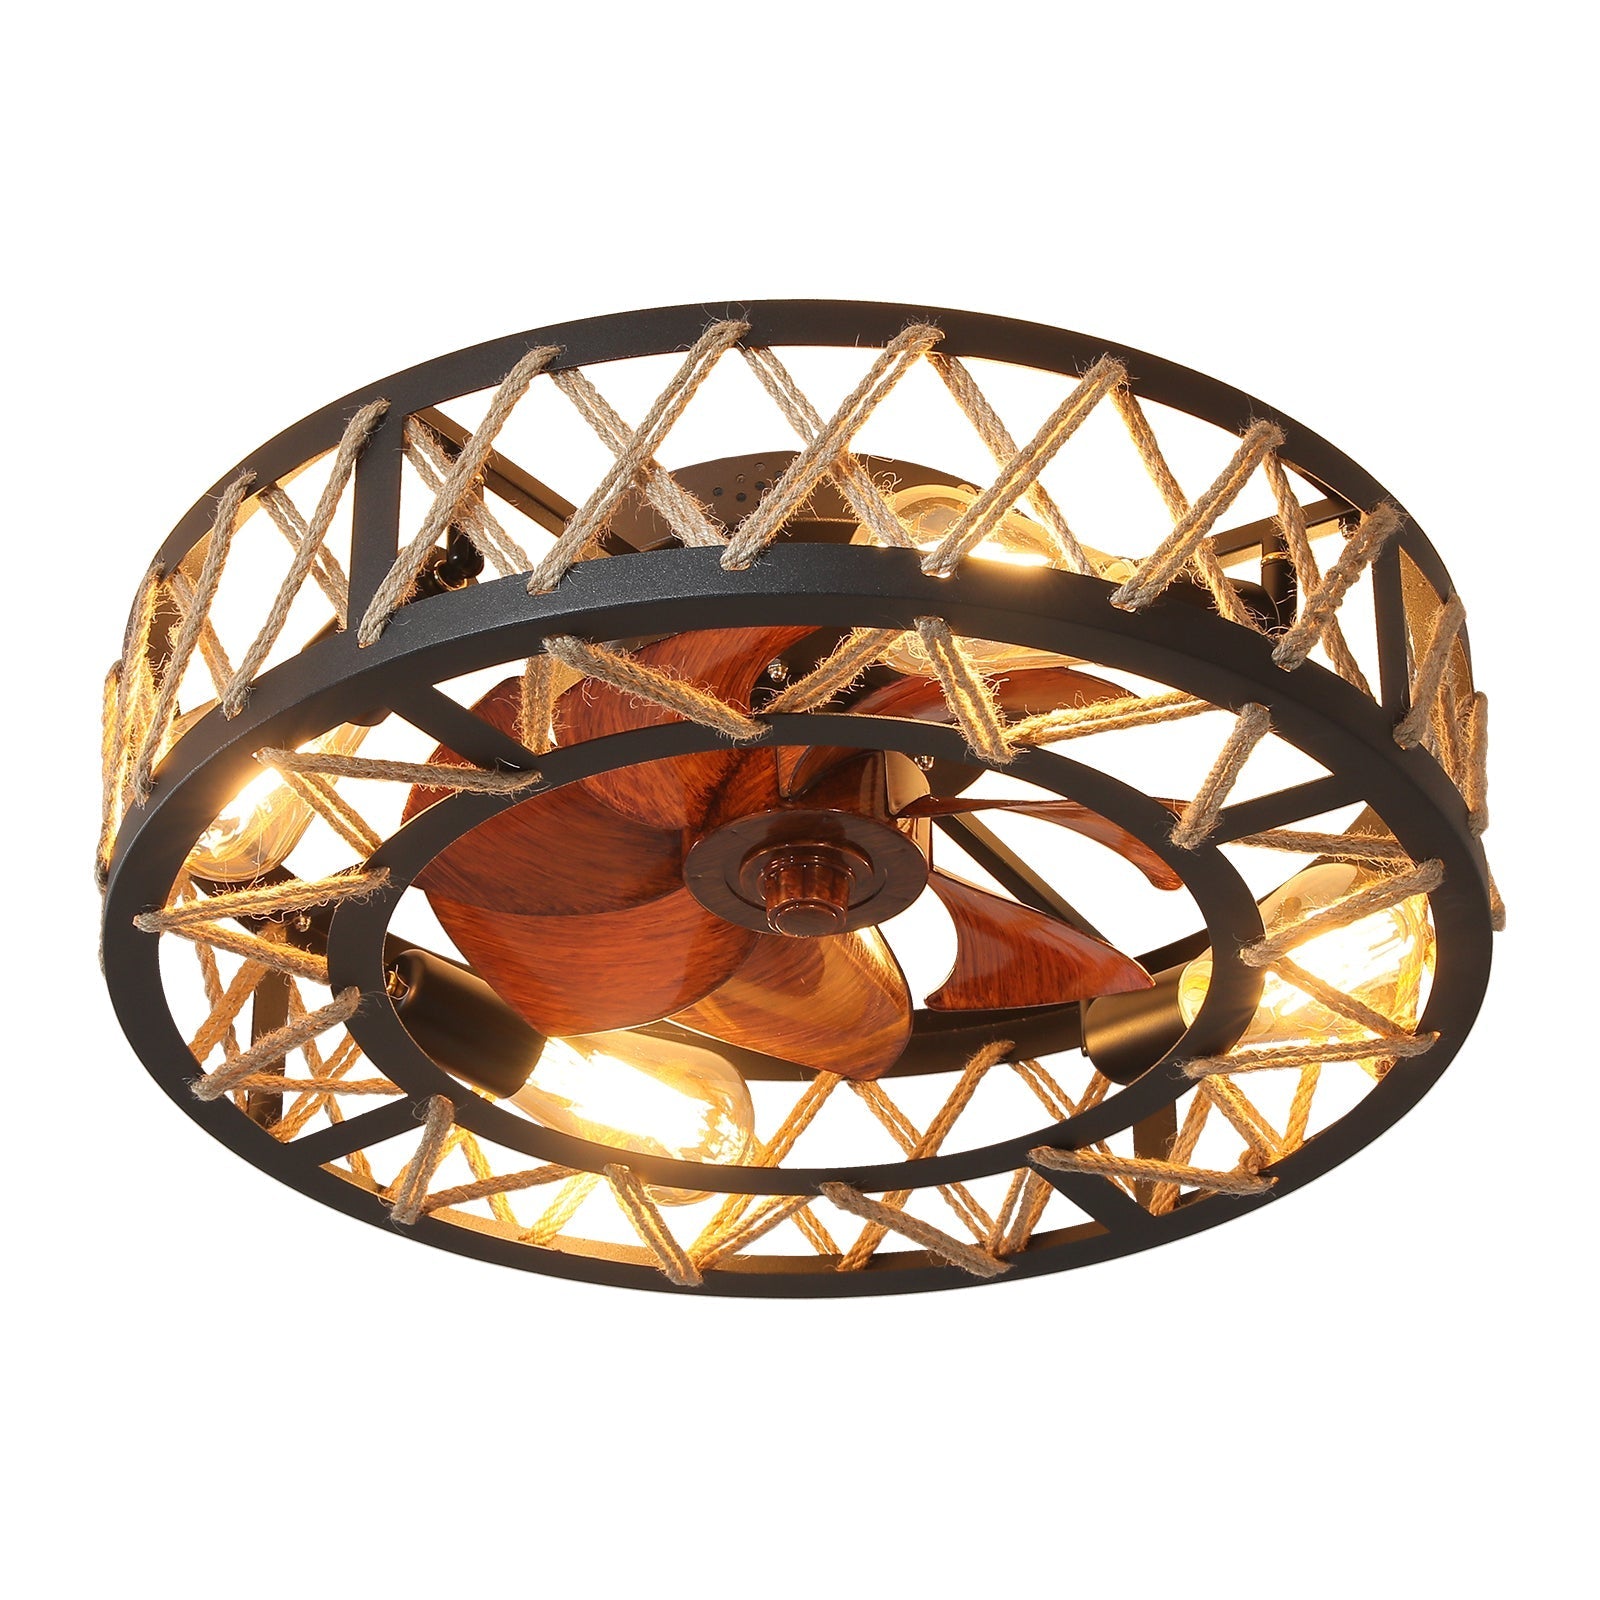 Vincenzo Ceiling Fan Chandelier Round 6 Speed Reversible With 4 Bulbs and Remote Control For Living Room